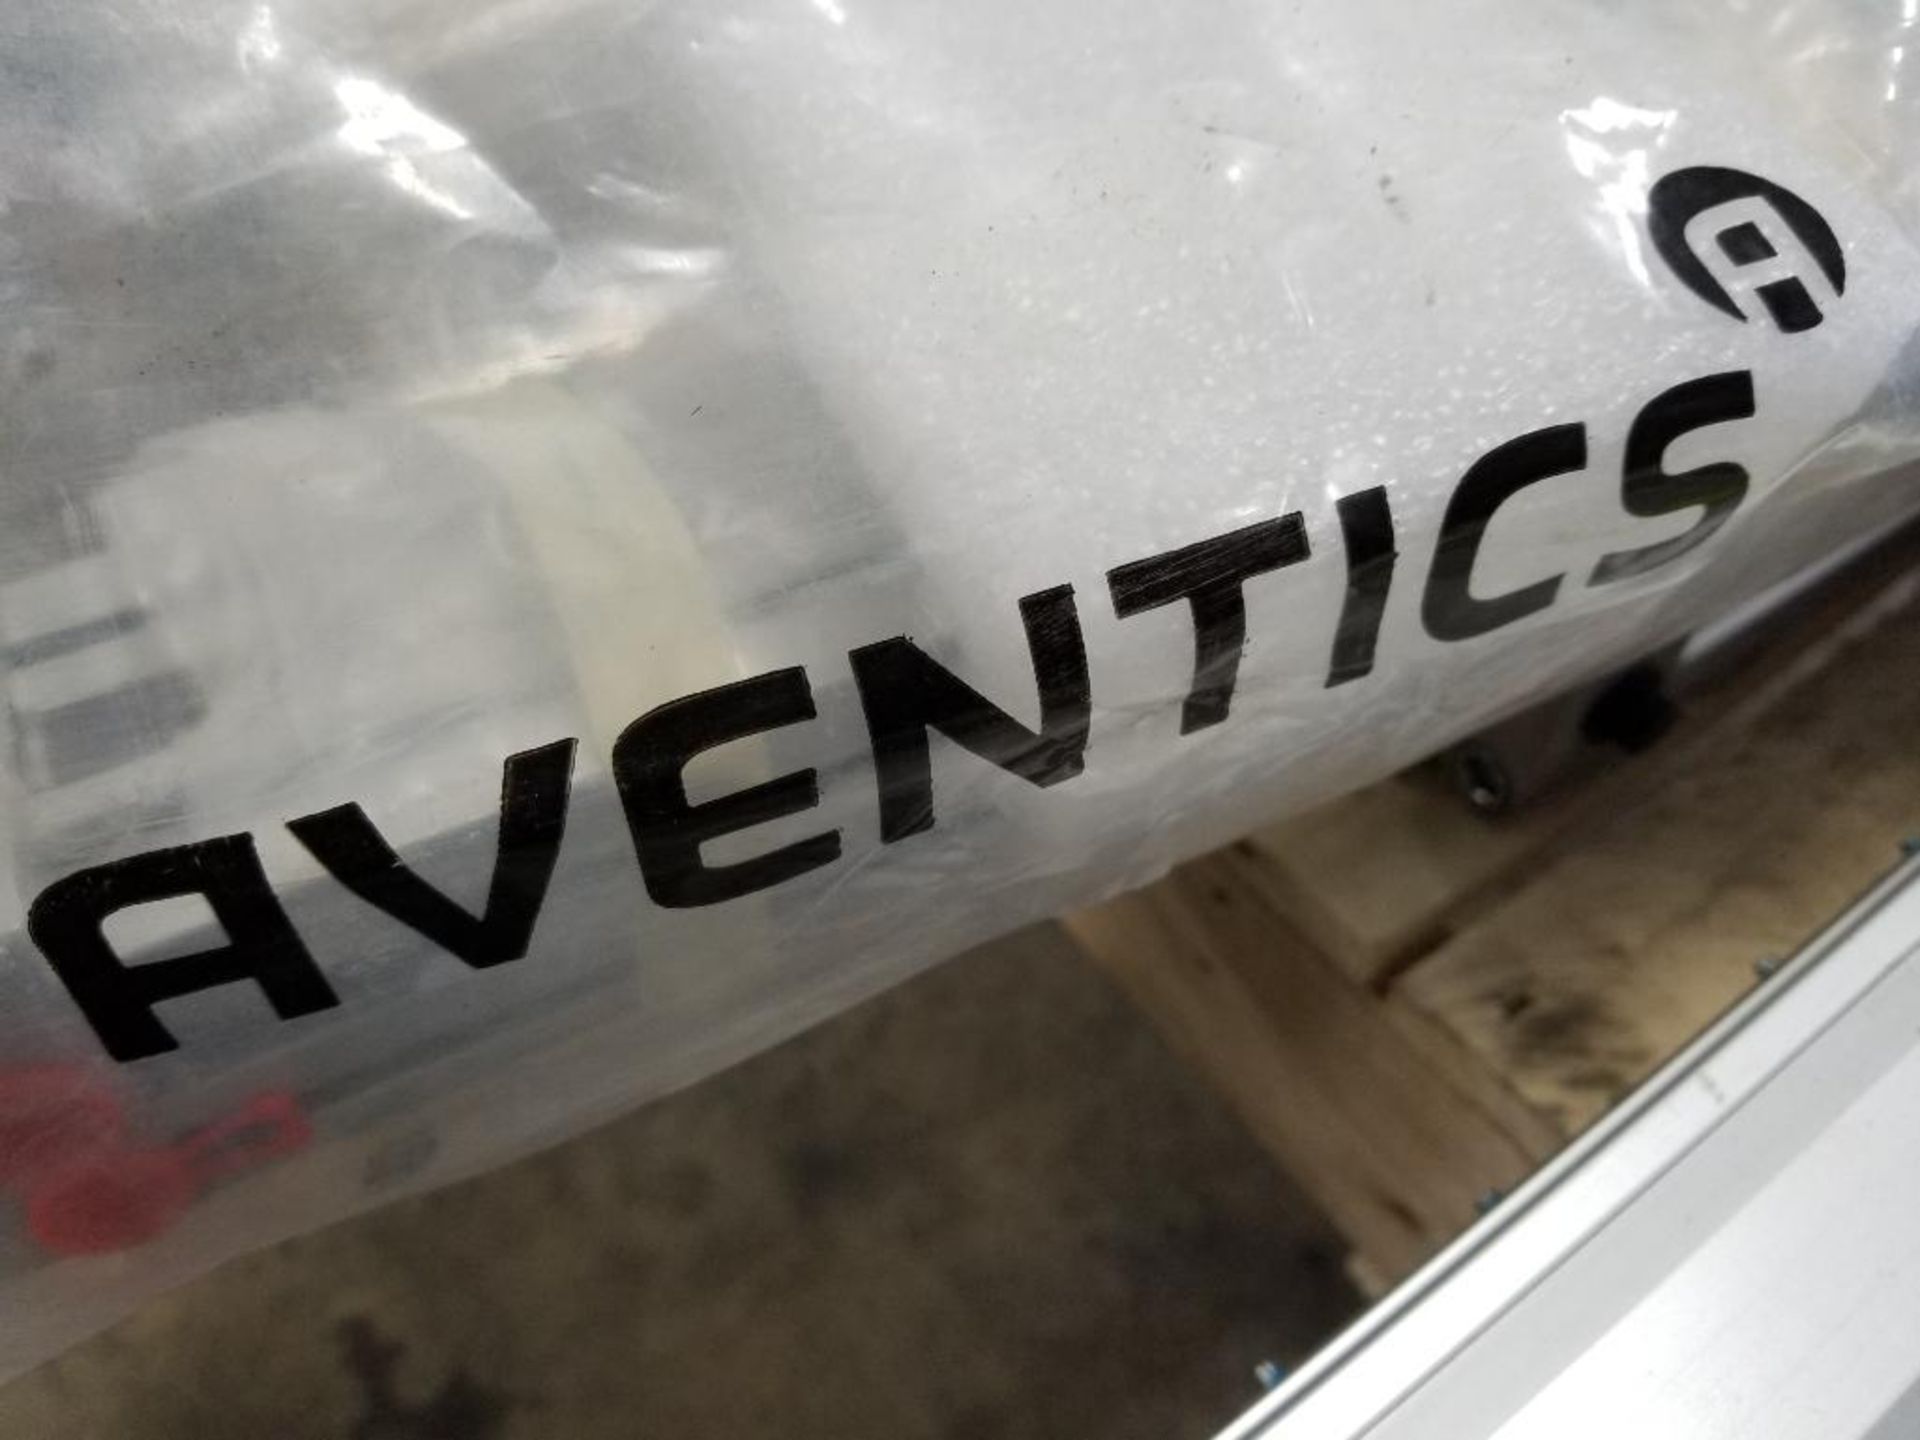 Aventics R480469651 Linear Slide. 1050mm, 51" overall length. New in package. - Image 2 of 7